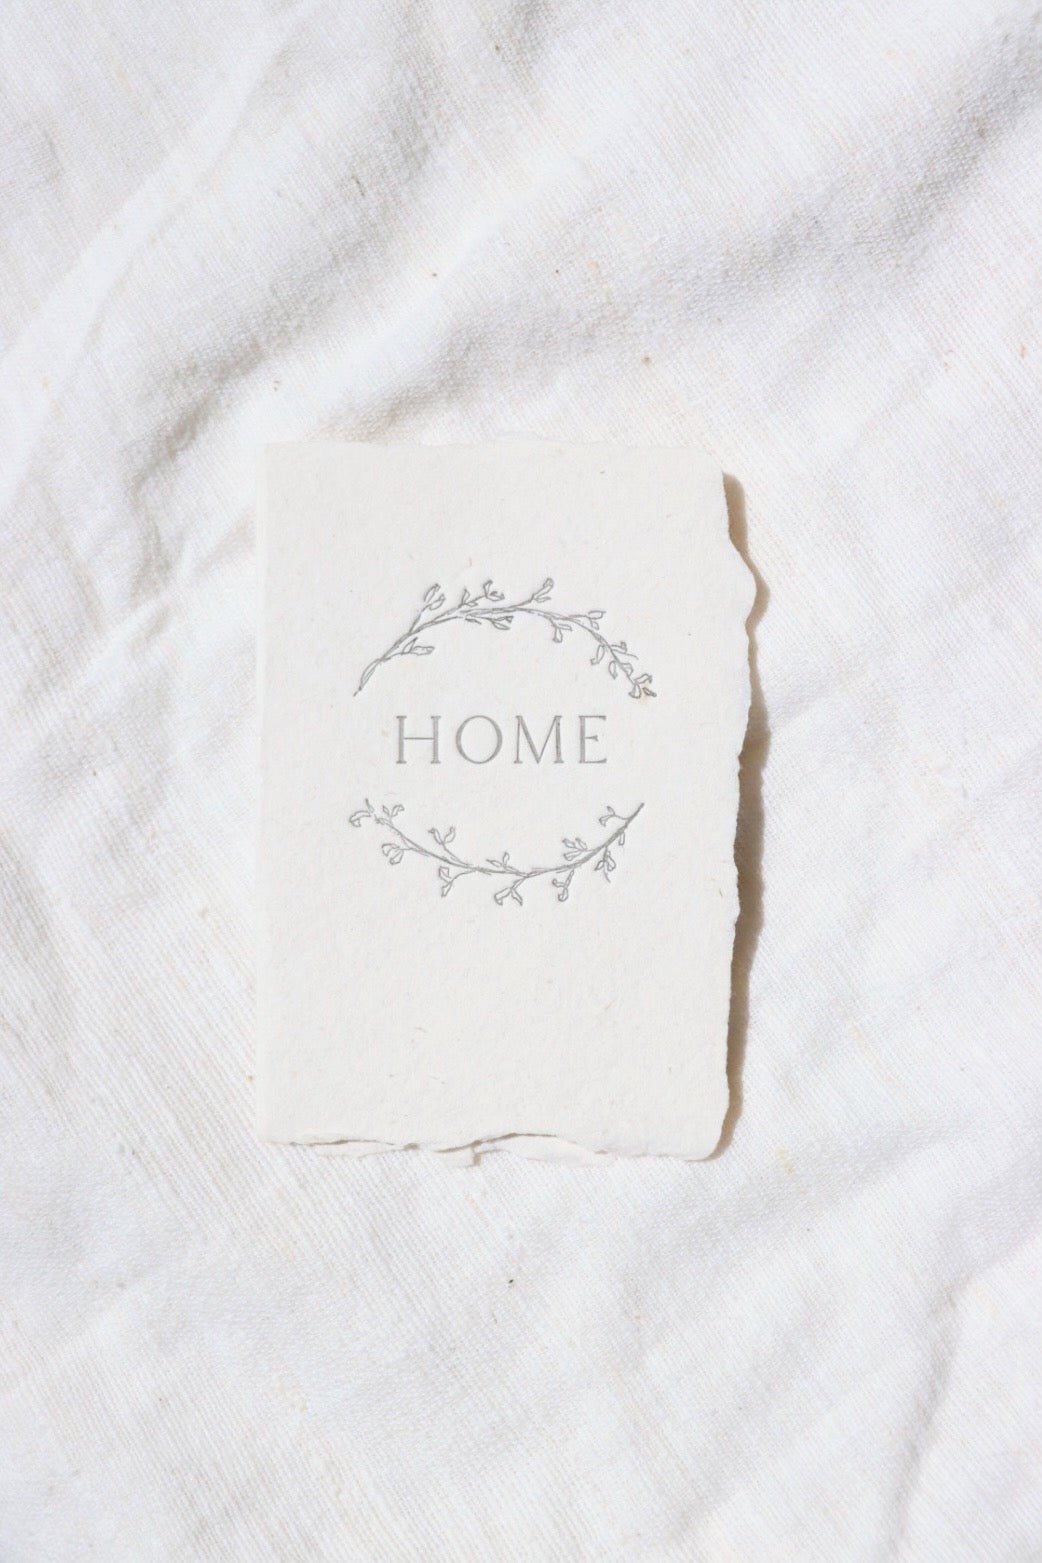 Home With Branches Card